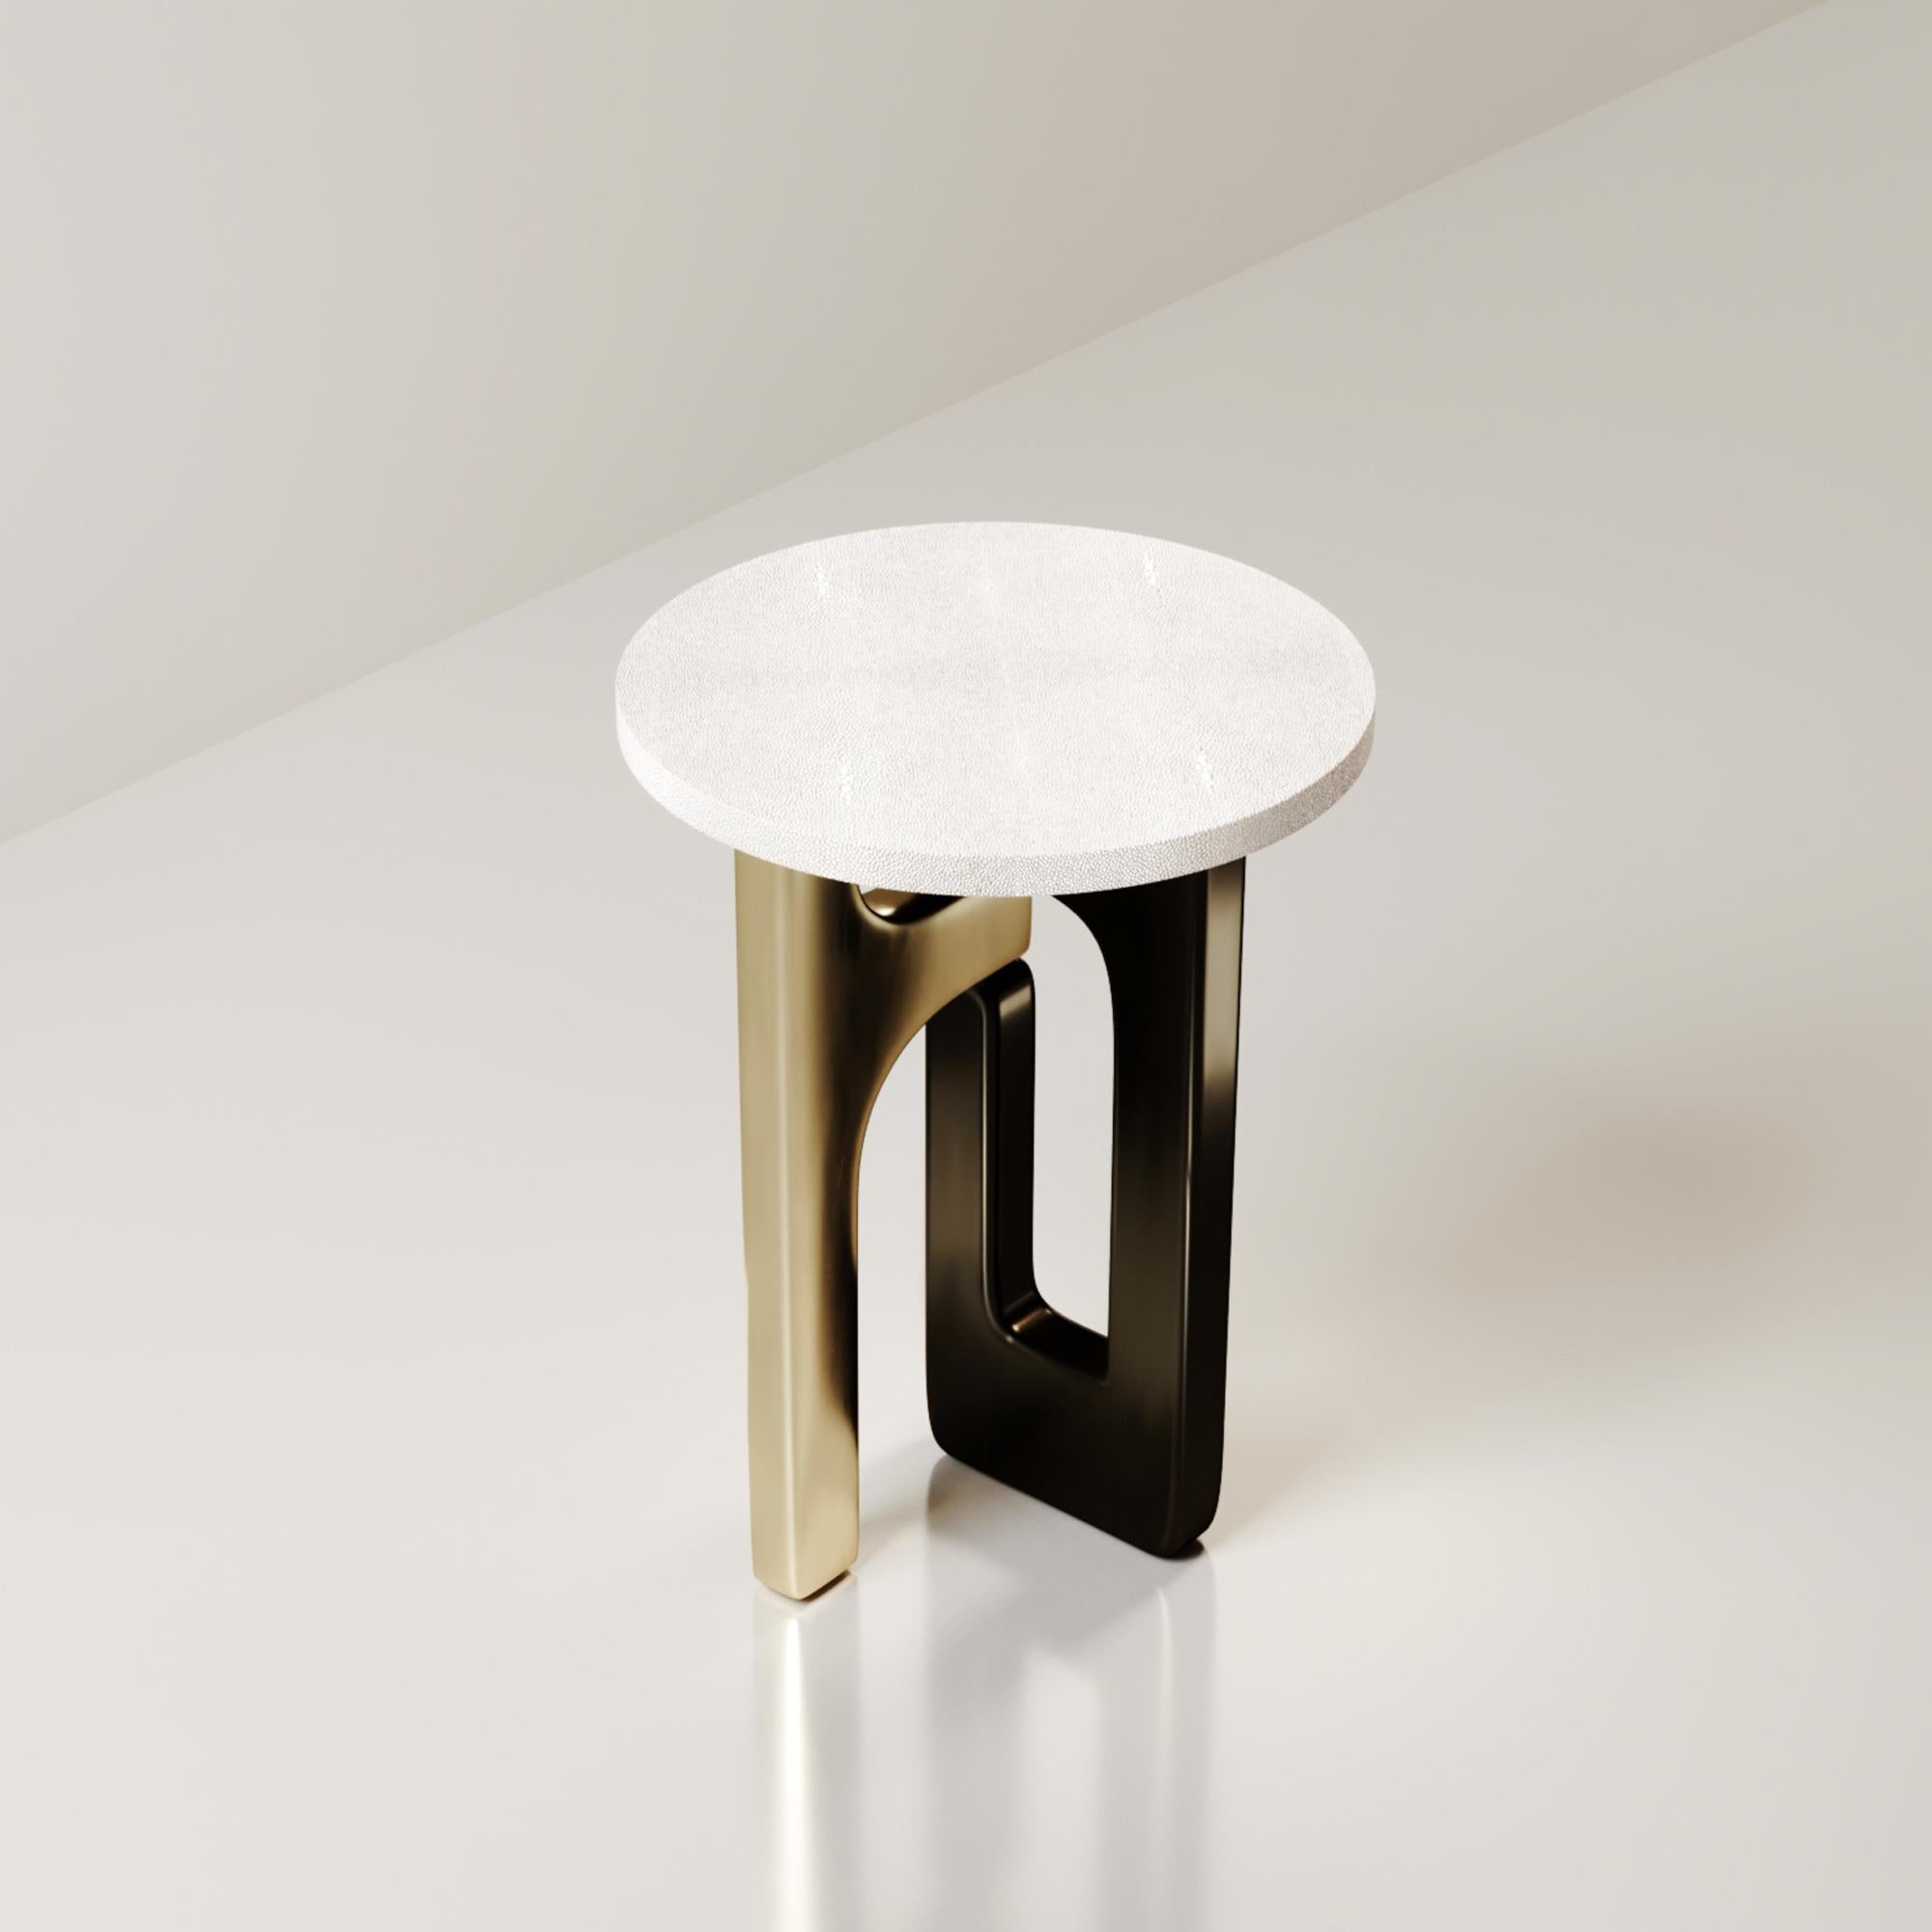 French Shagreen Side Table with Bronze Patina Brass Details by Kifu Paris For Sale